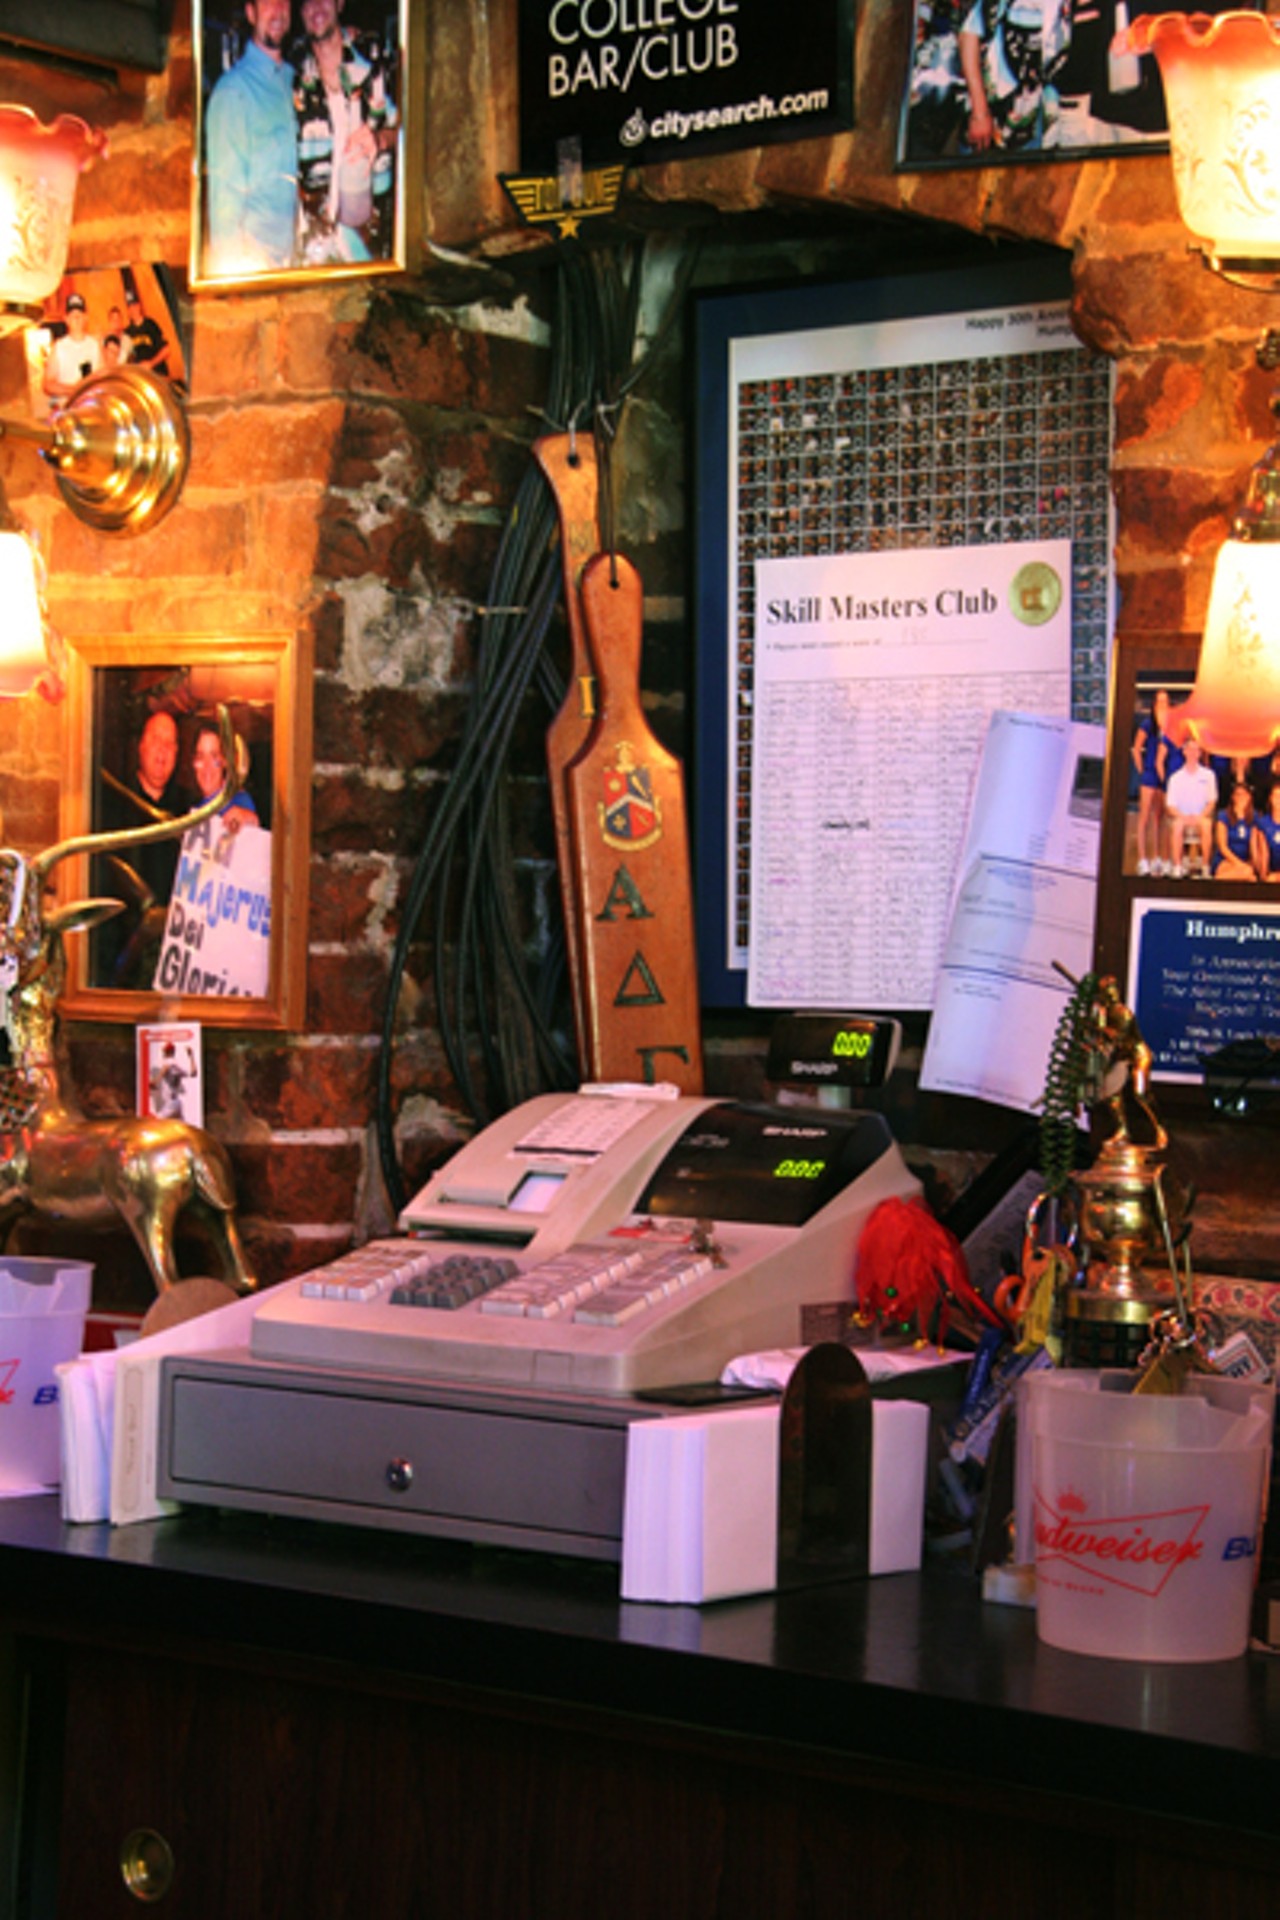 Humphrey&rsquo;s is stocked with SLU memorabilia for all the students and alumni to enjoy.